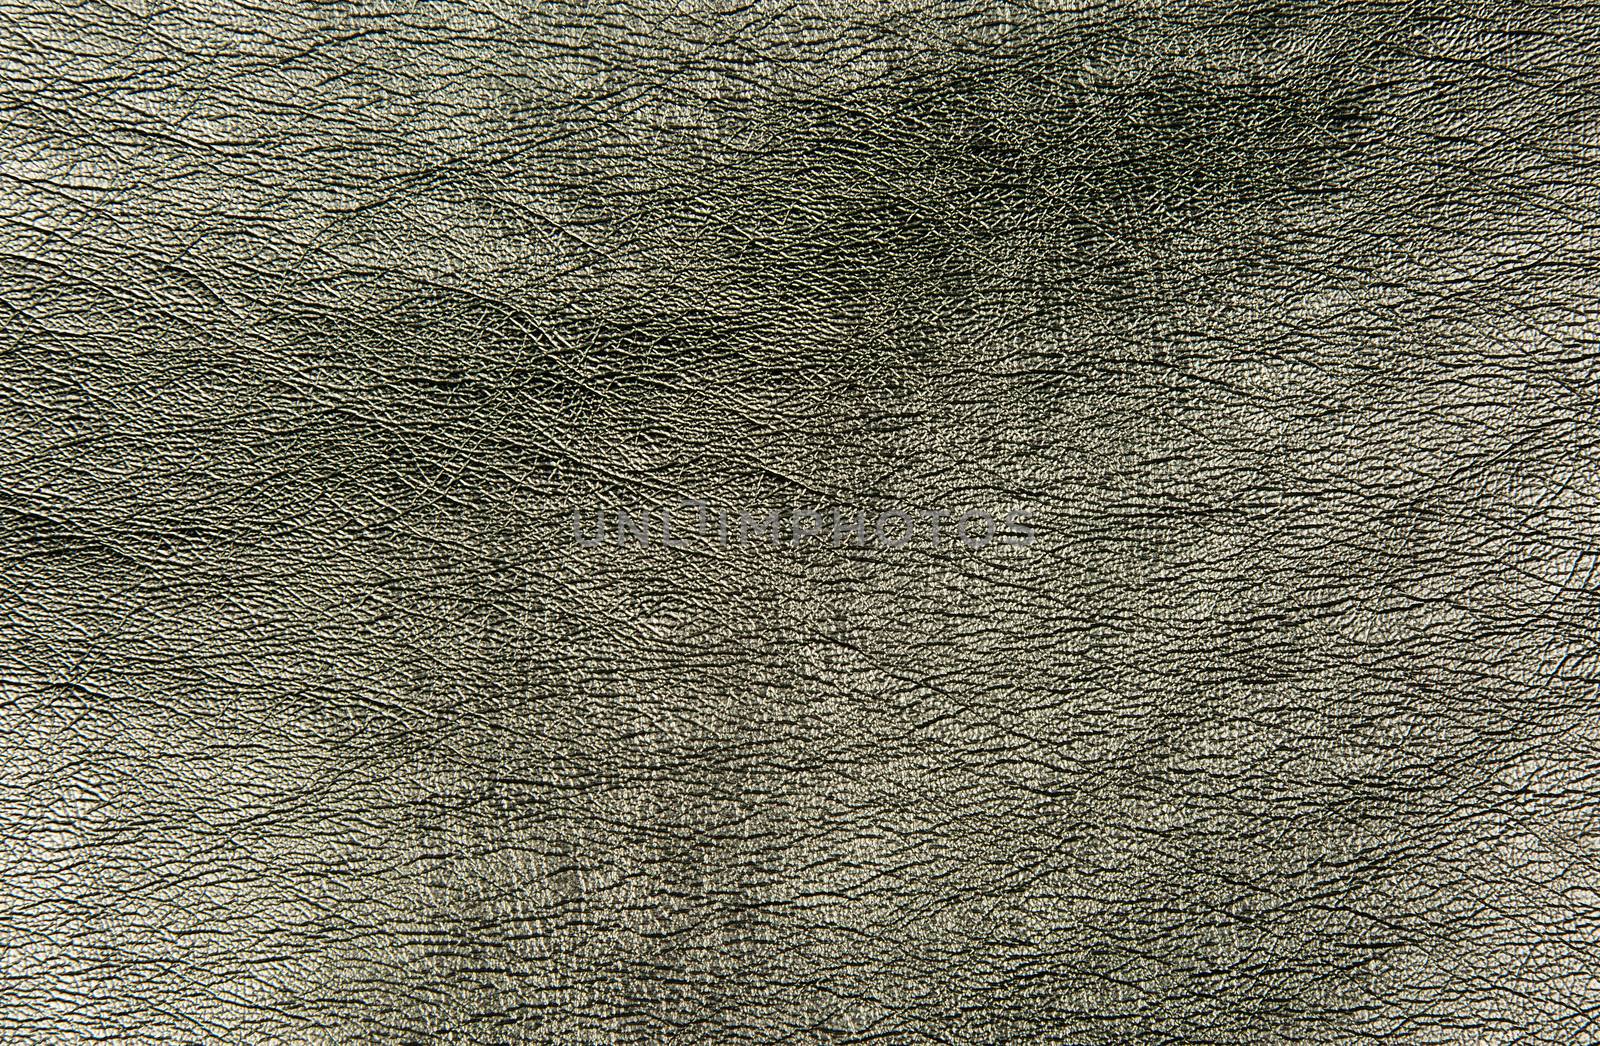 Texture of coarse ground leather with clearly visible structure. Interesting background and texture. horizontal view.
